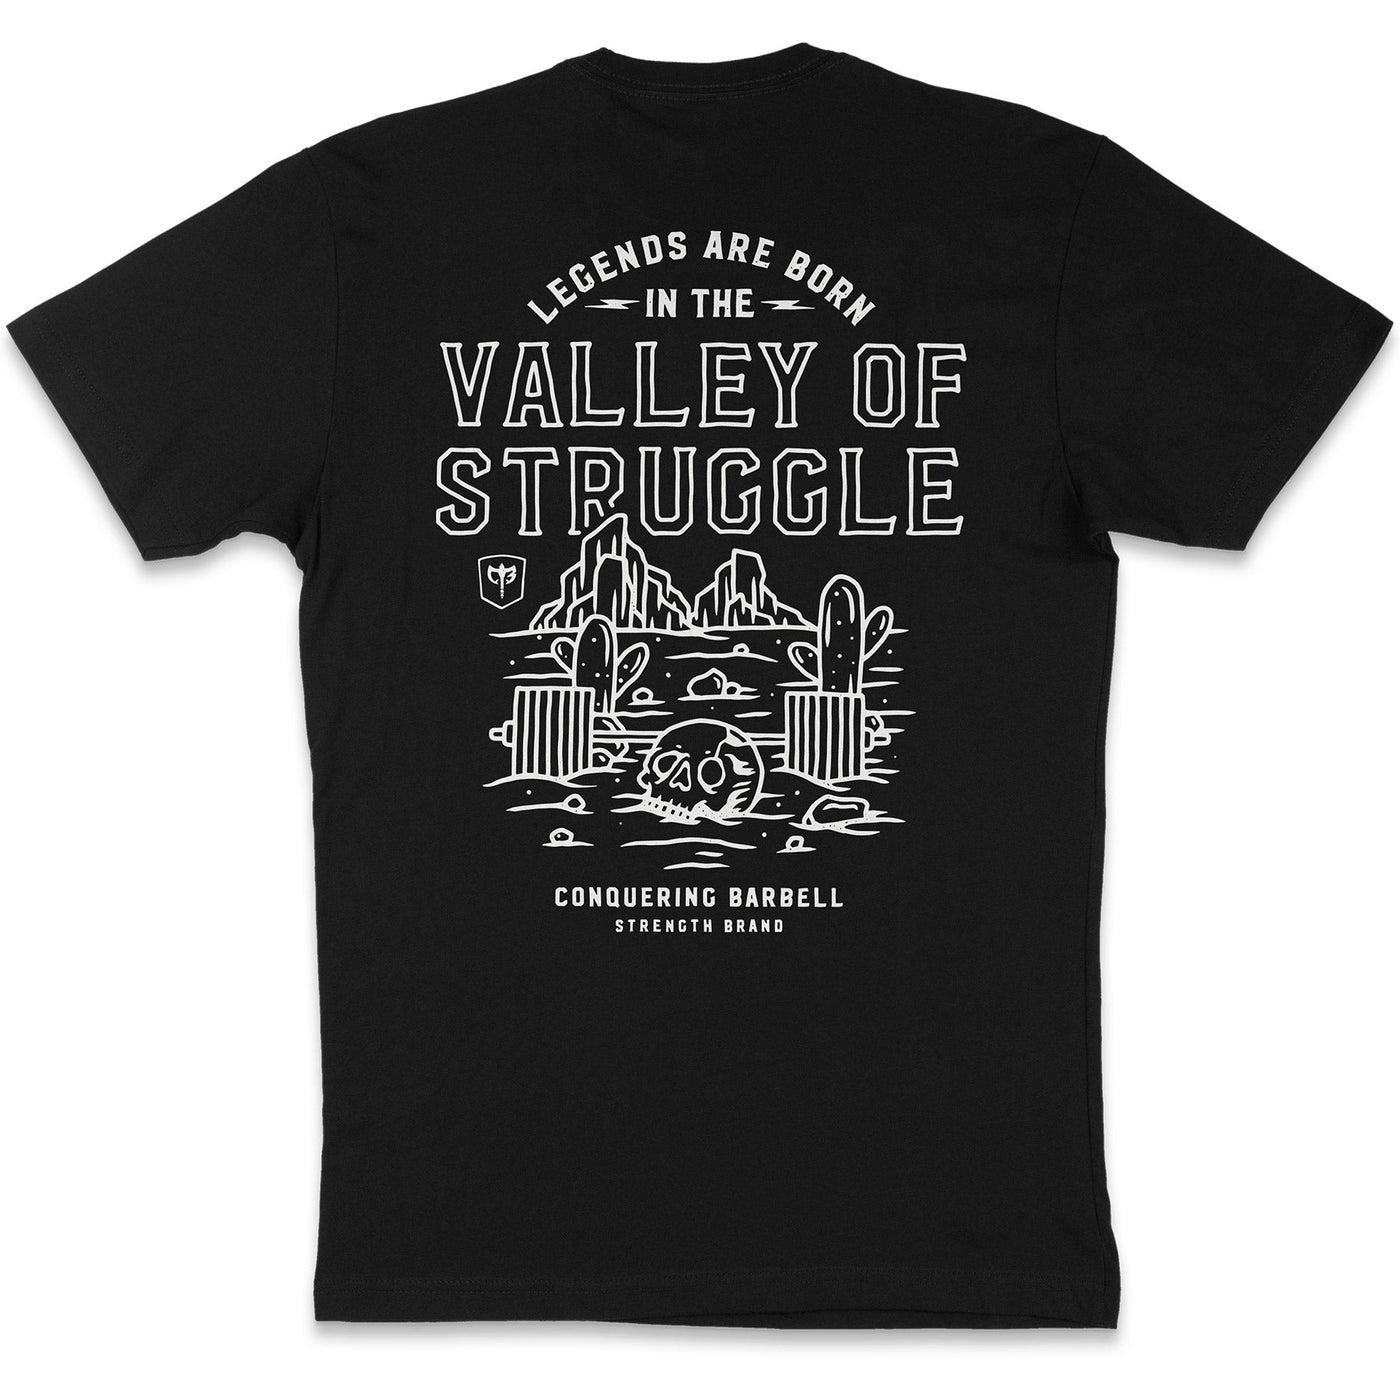 Legends are born in the Valley of Struggle - Black Tee - Conquering Barbell